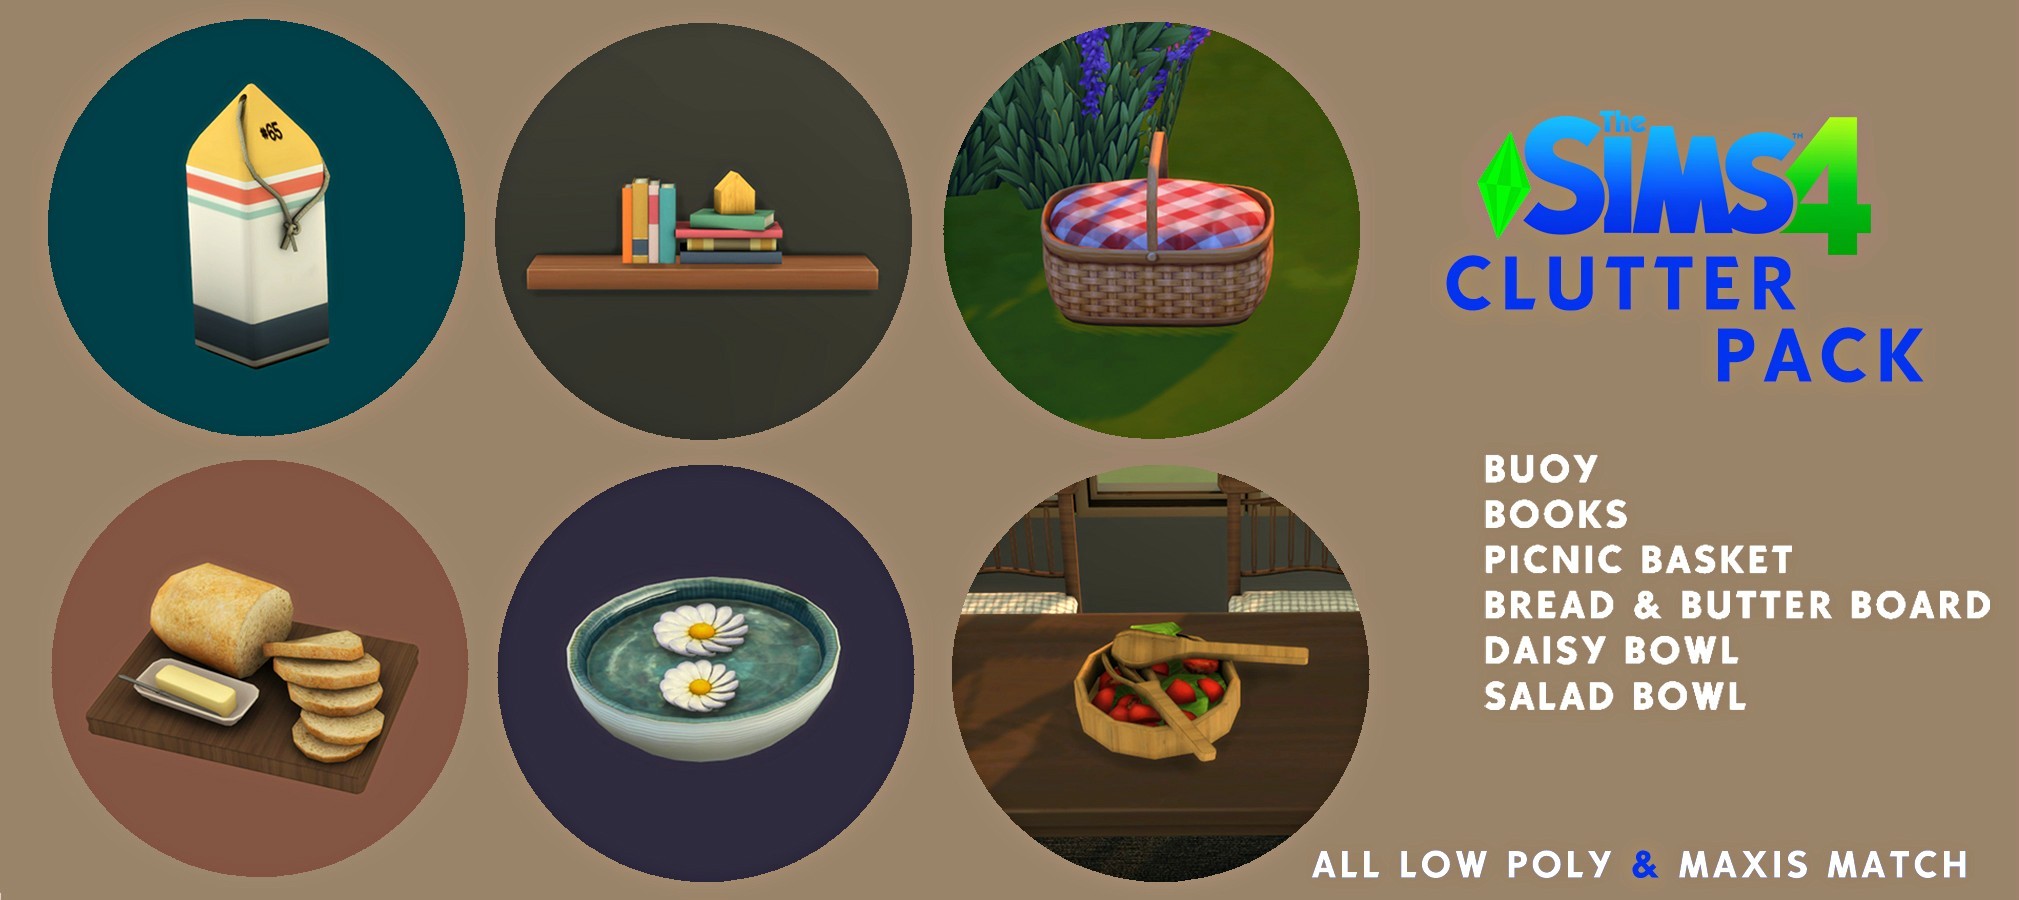 Leo 4 Sims: Clutter Pack. 